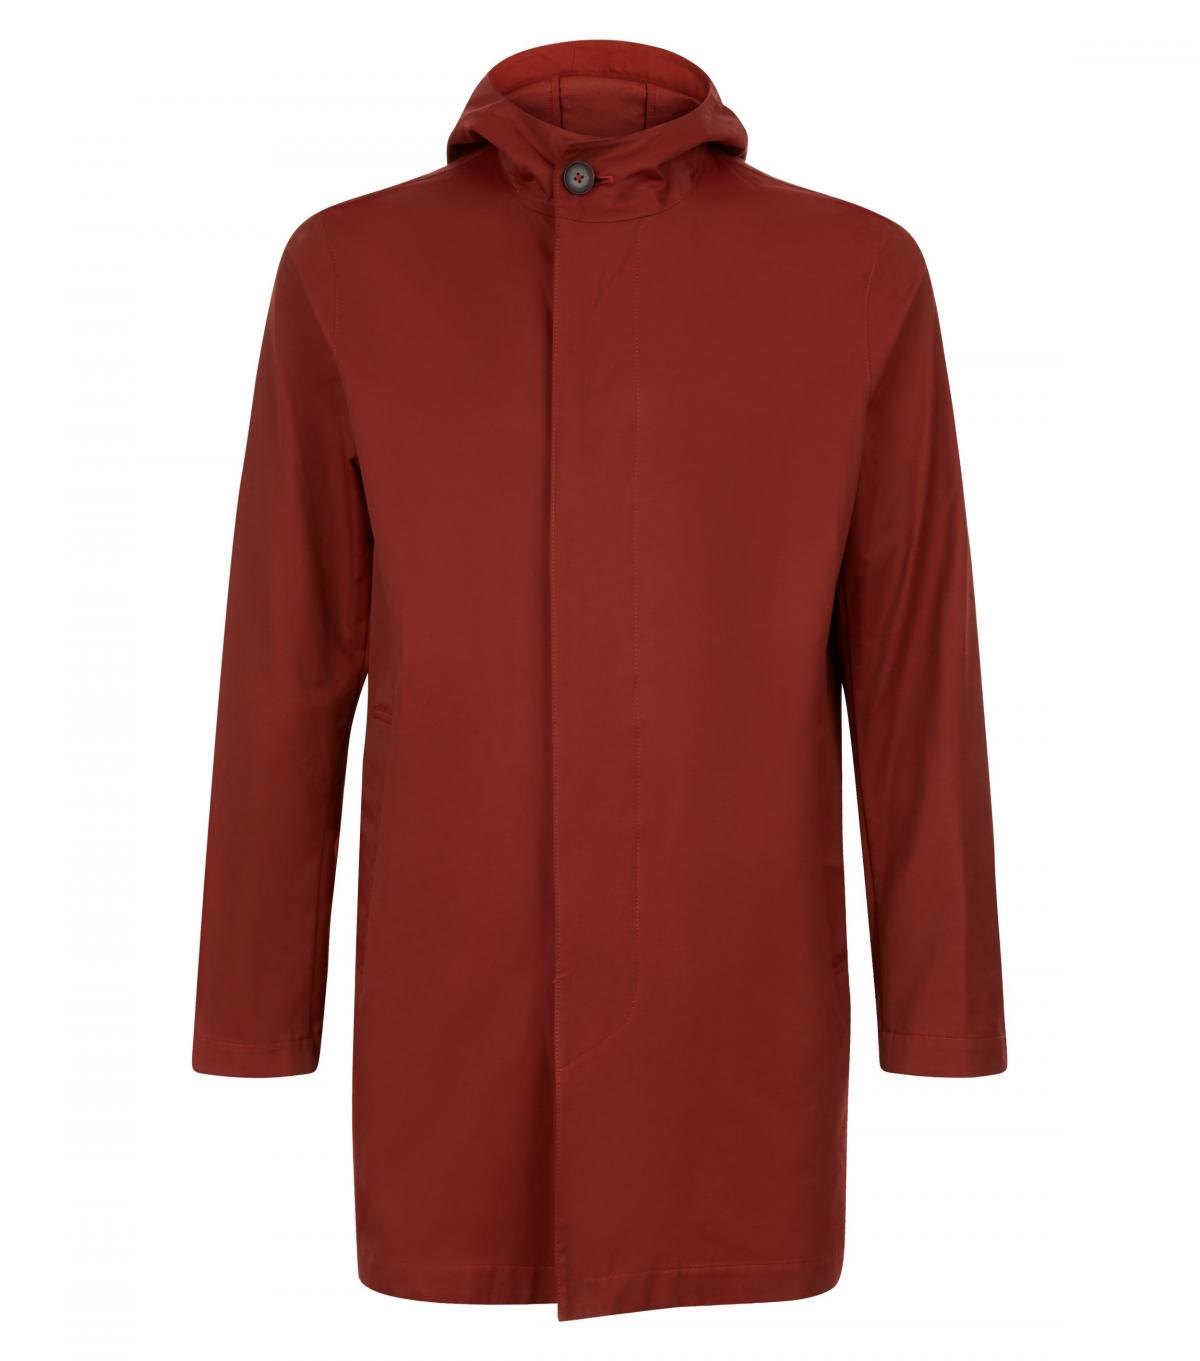 New Look, Red hooded trench coat, £49.99